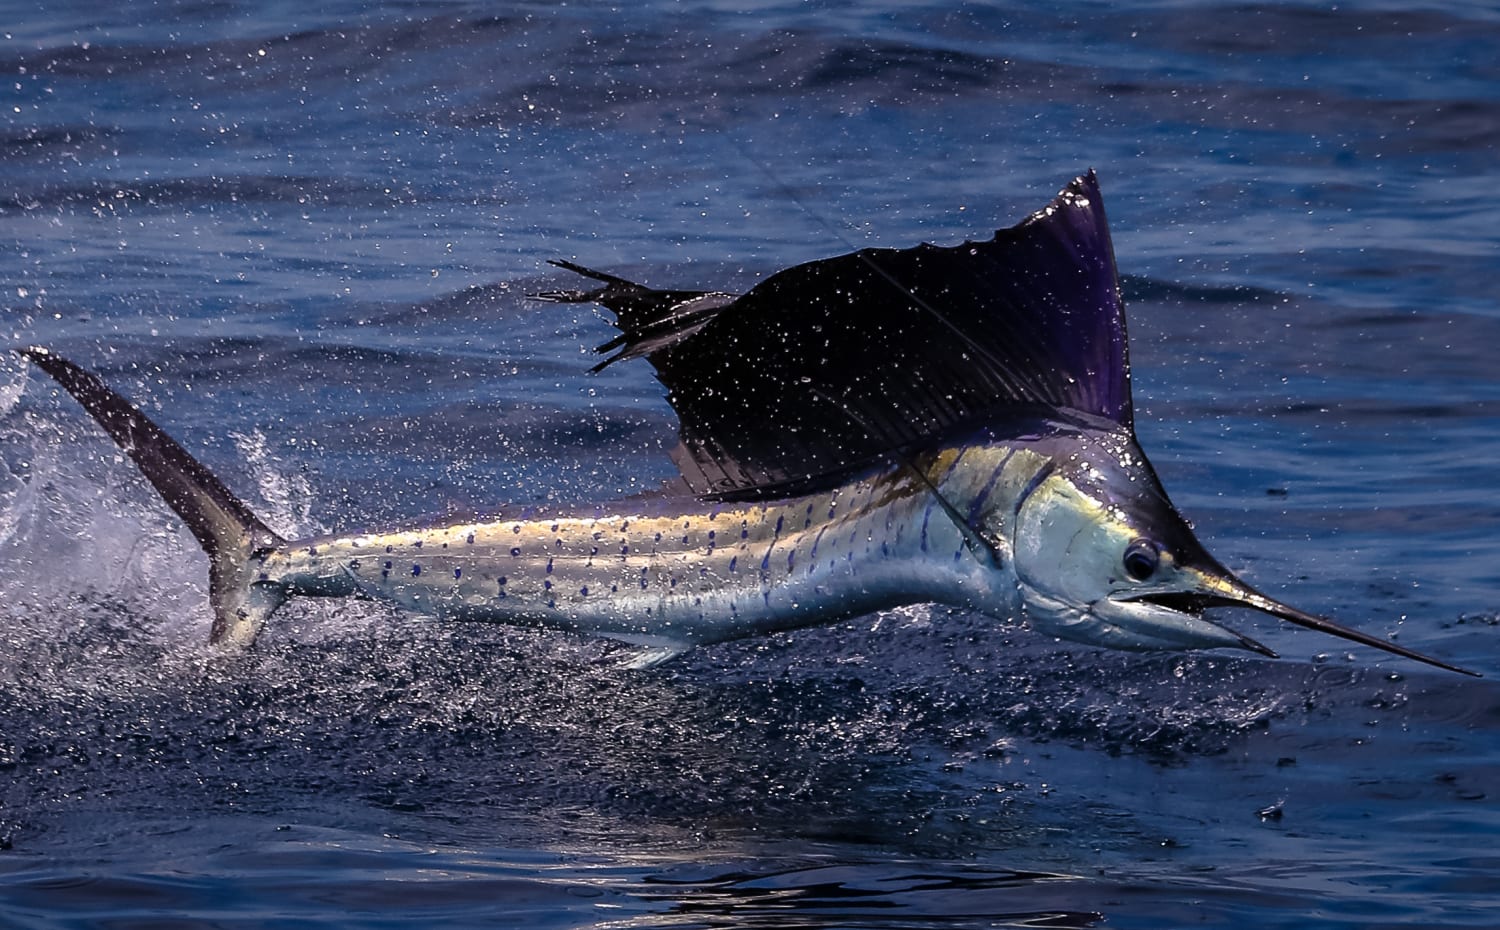 100-pound sailfish stabs woman, 73, on fishing boat after leaping